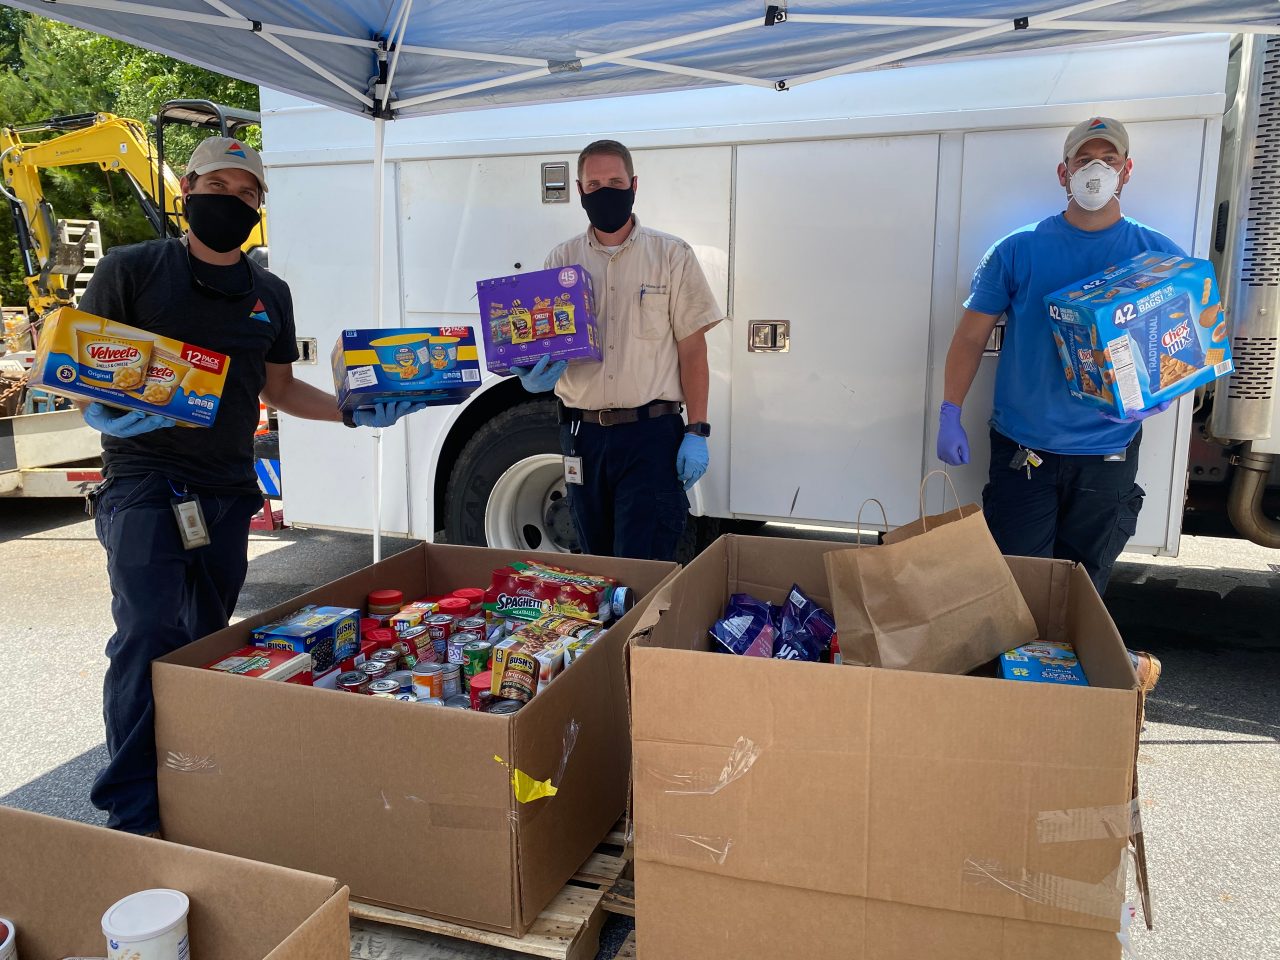 Atlanta Gas Light employees collected more than 20,000 pounds of food